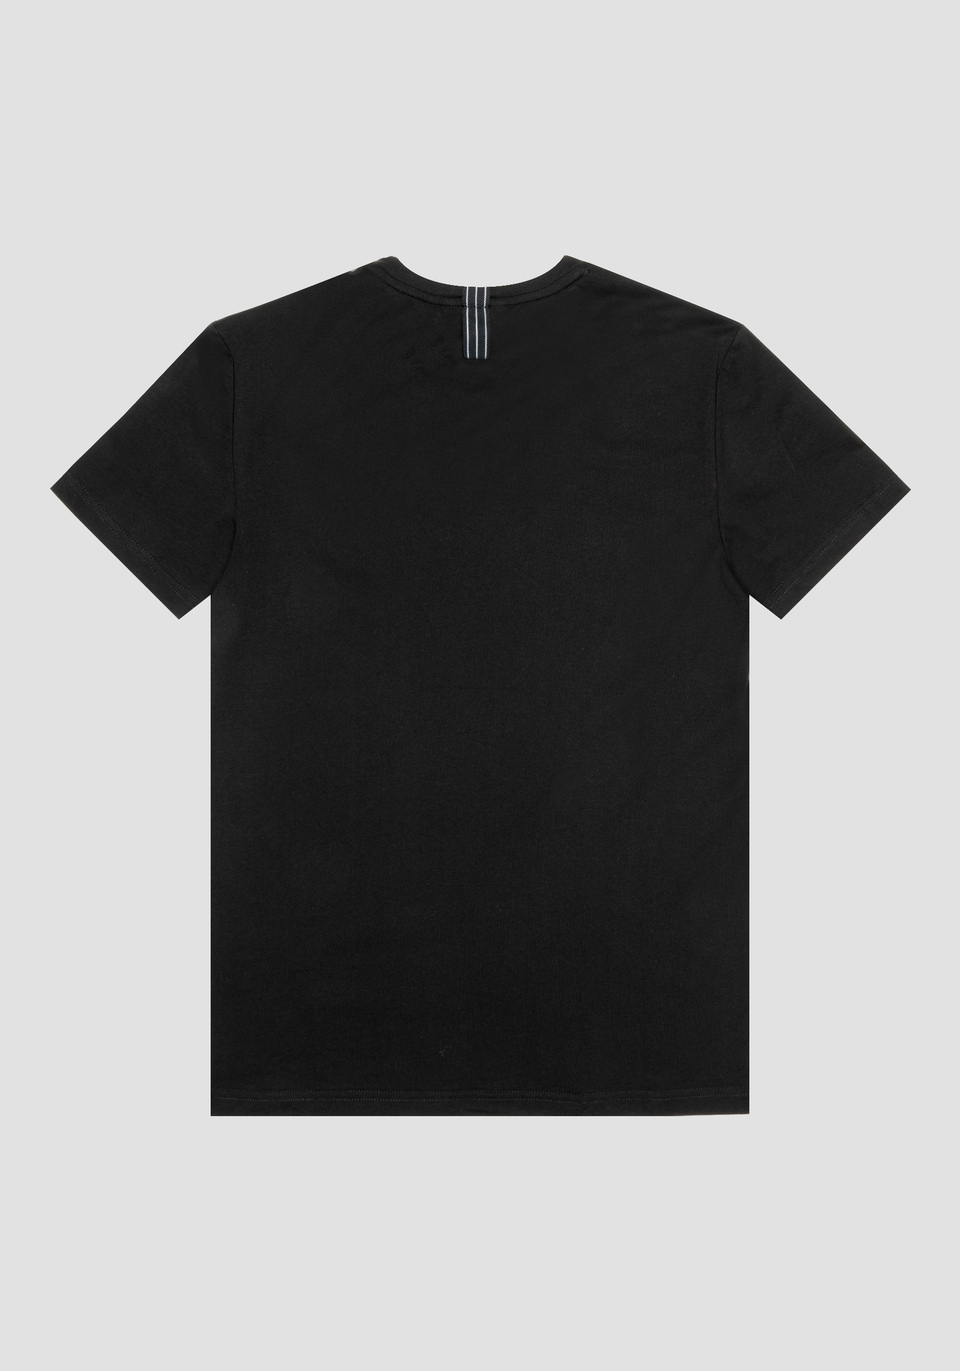 SLIM FIT T-SHIRT IN SOFT COTTON WITH PRINT - Antony Morato Online Shop